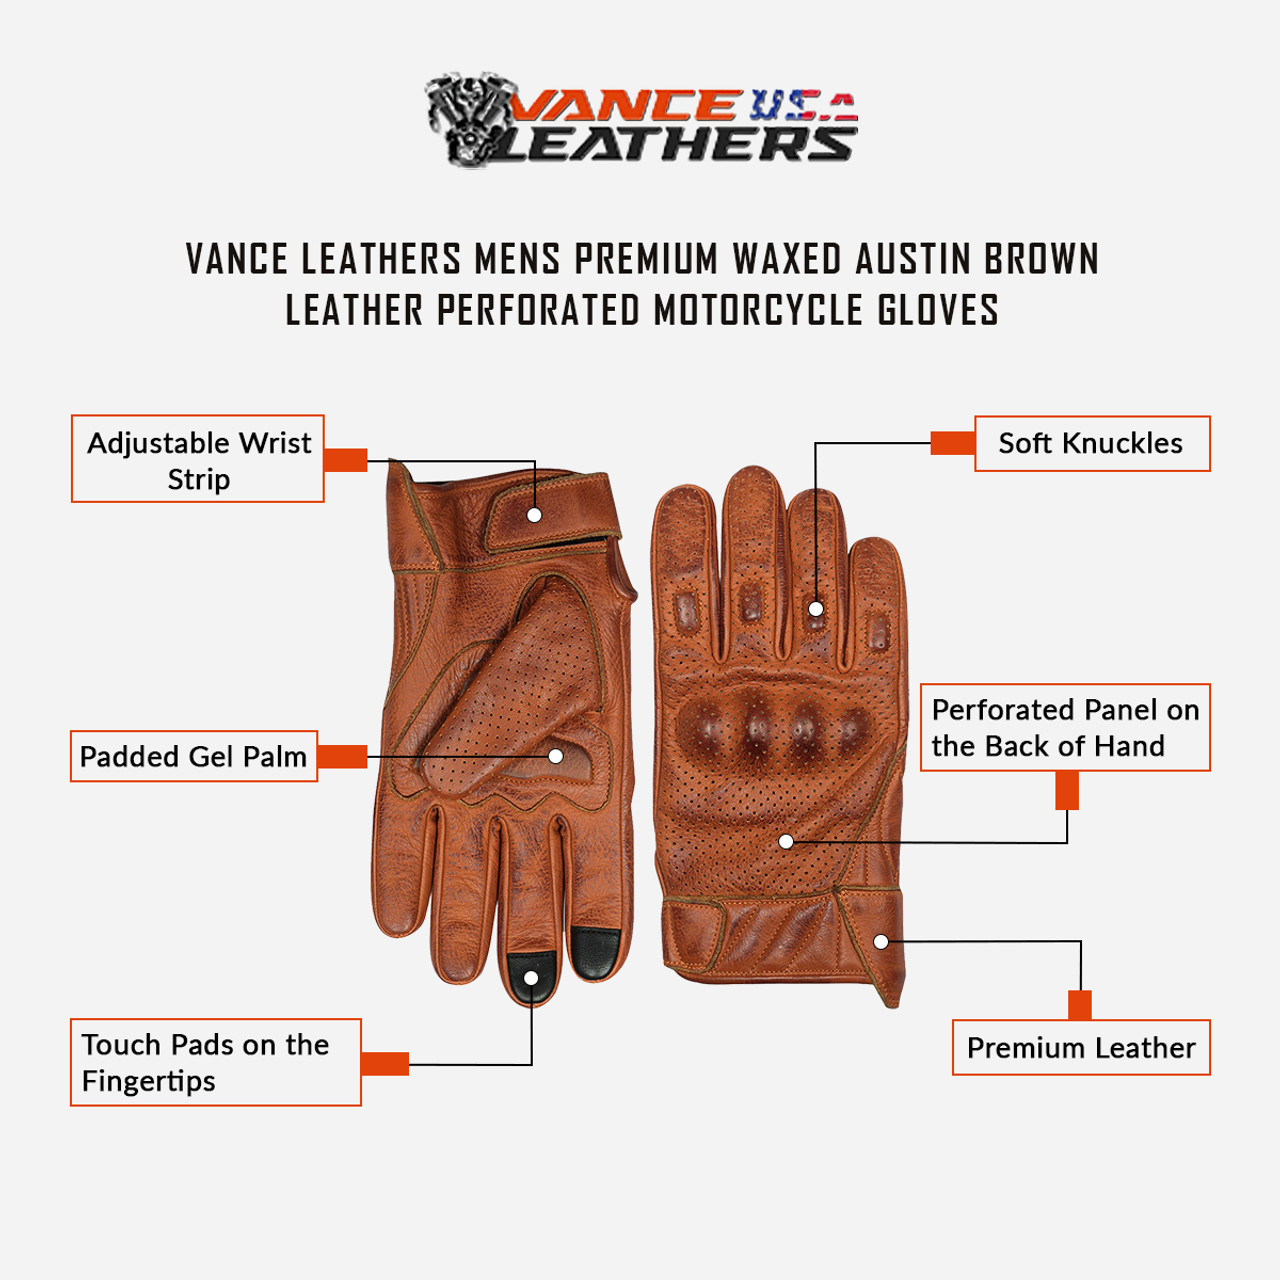 Vance Leathers Mens Premium Waxed Austin Brown Leather Perforated Motorcycle Gloves - Size chart